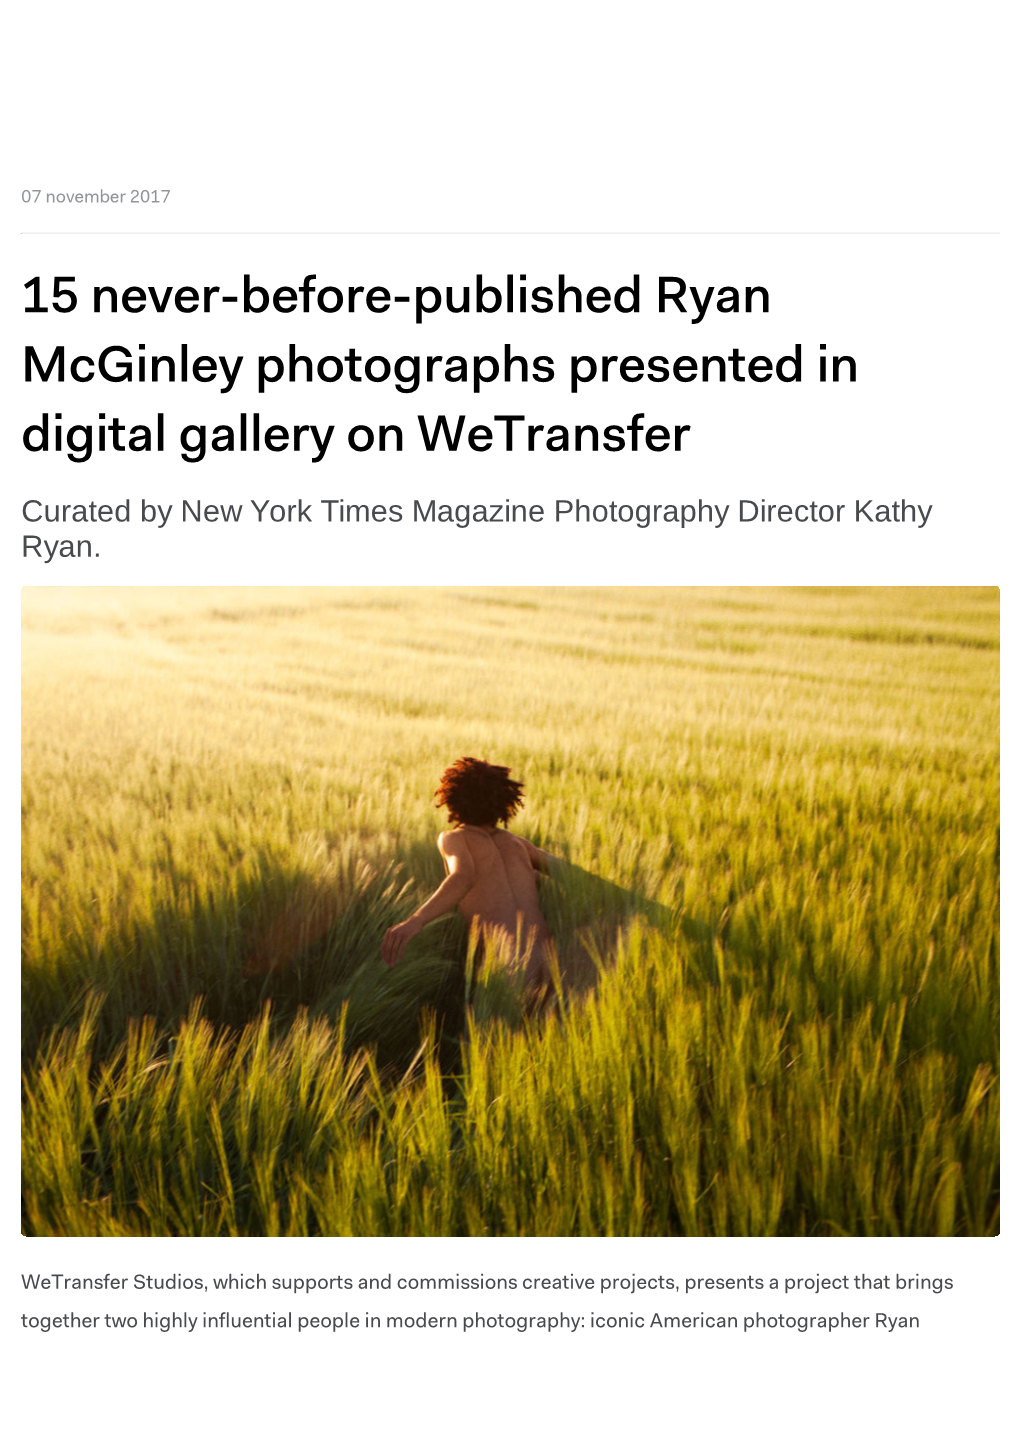 15 Never-Before-Published Ryan Mcginley Photographs Presented in Digital Gallery on Wetransfer Curated by New York Times Magazine Photography Director Kathy Ryan